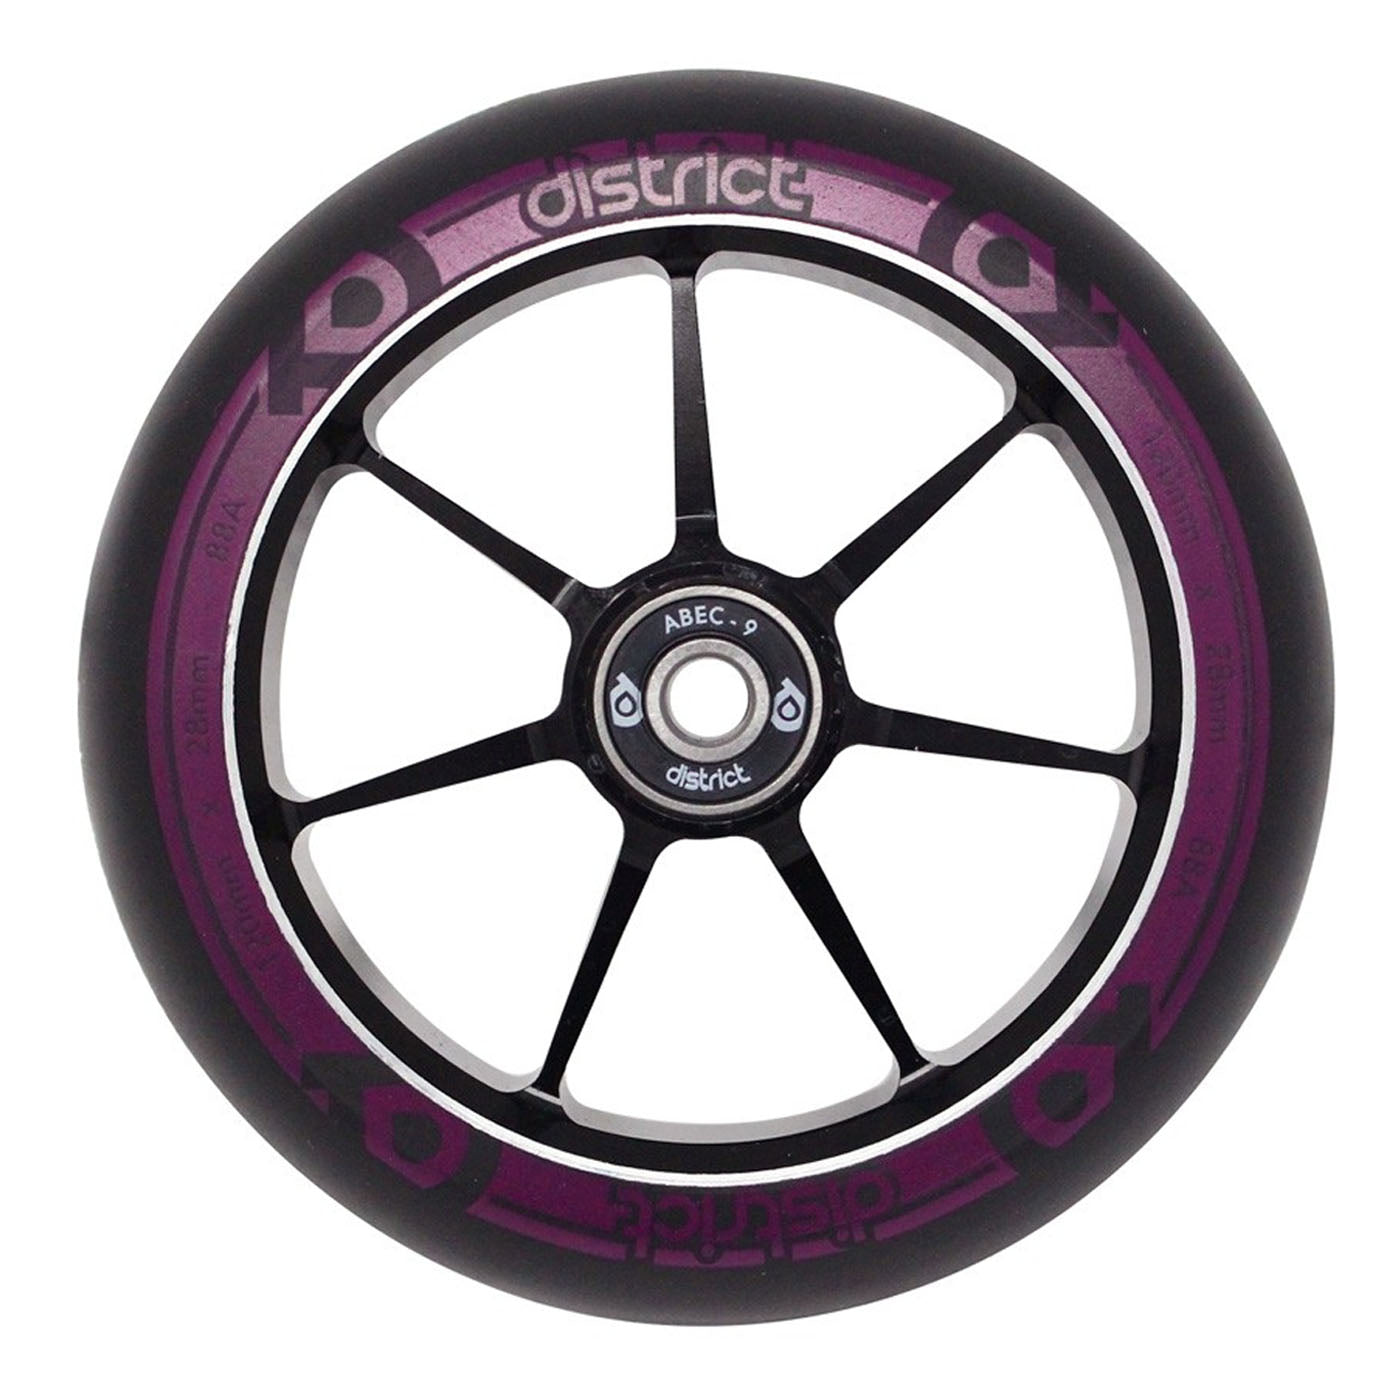 District Scooters 110mm Dual Width Core Wheel - Black / Magenta - Prime Delux Store